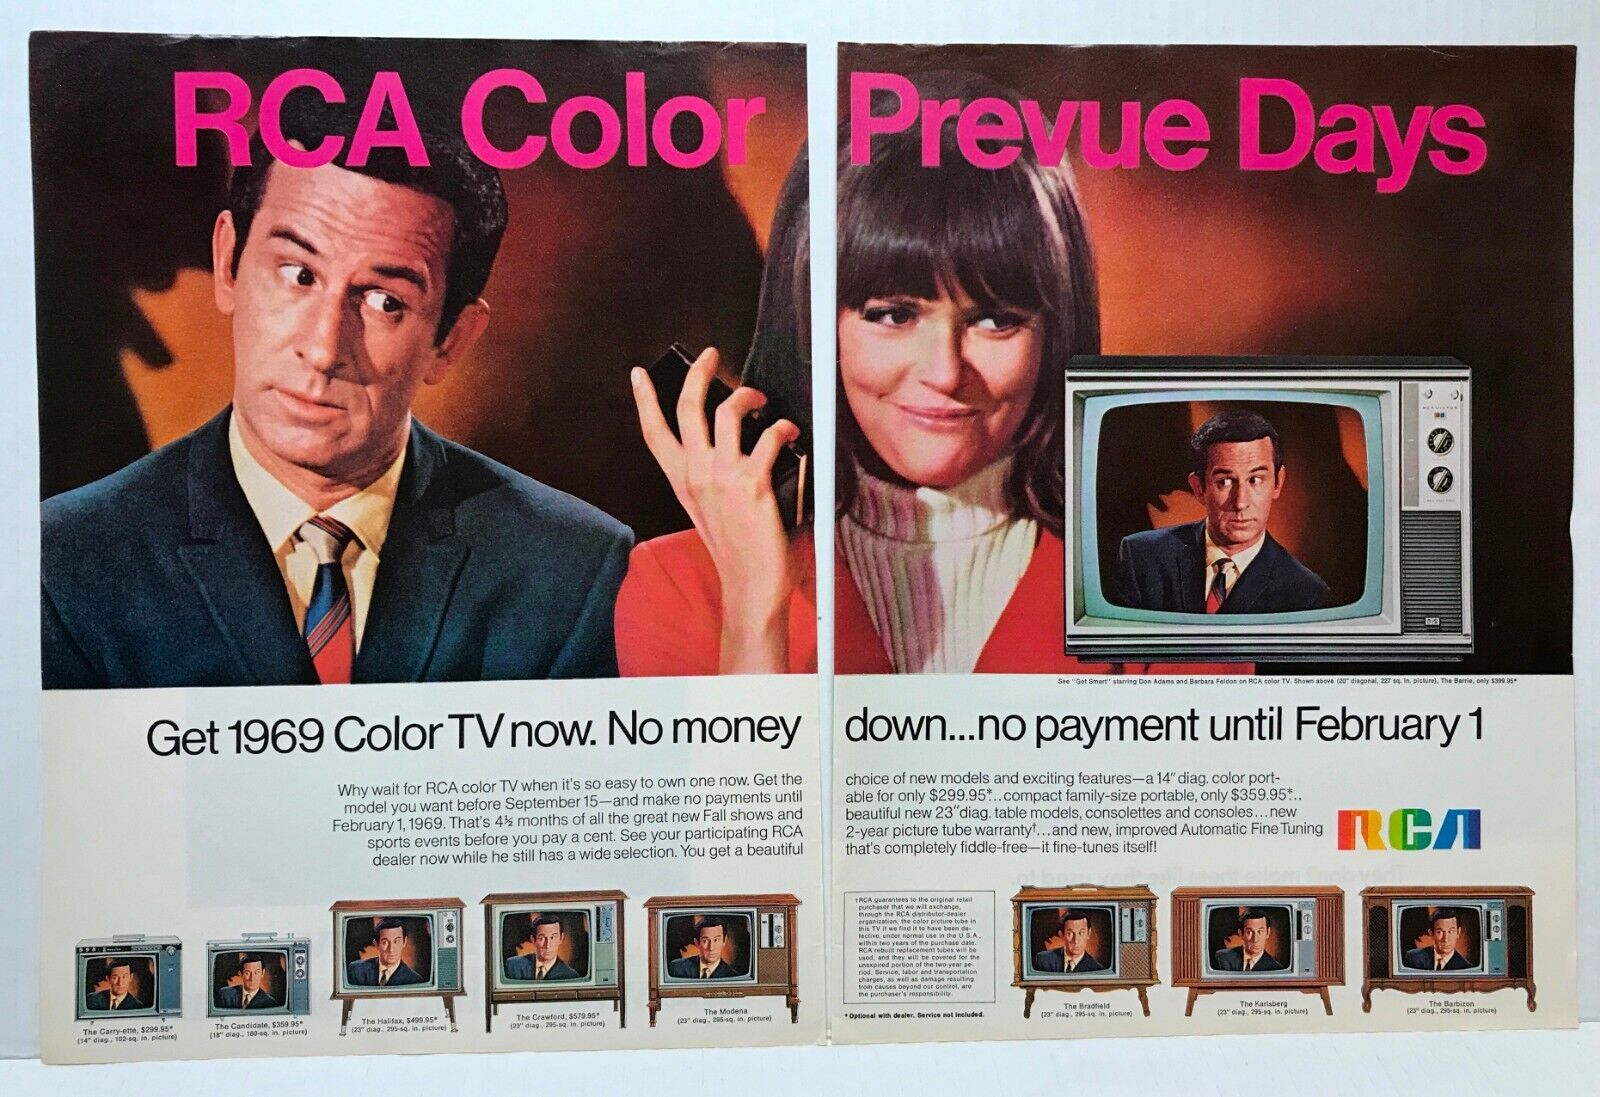 1968 RCA Color Preview Days Maxwell Smart Endorsement VINTAGE PRINT AD LM68